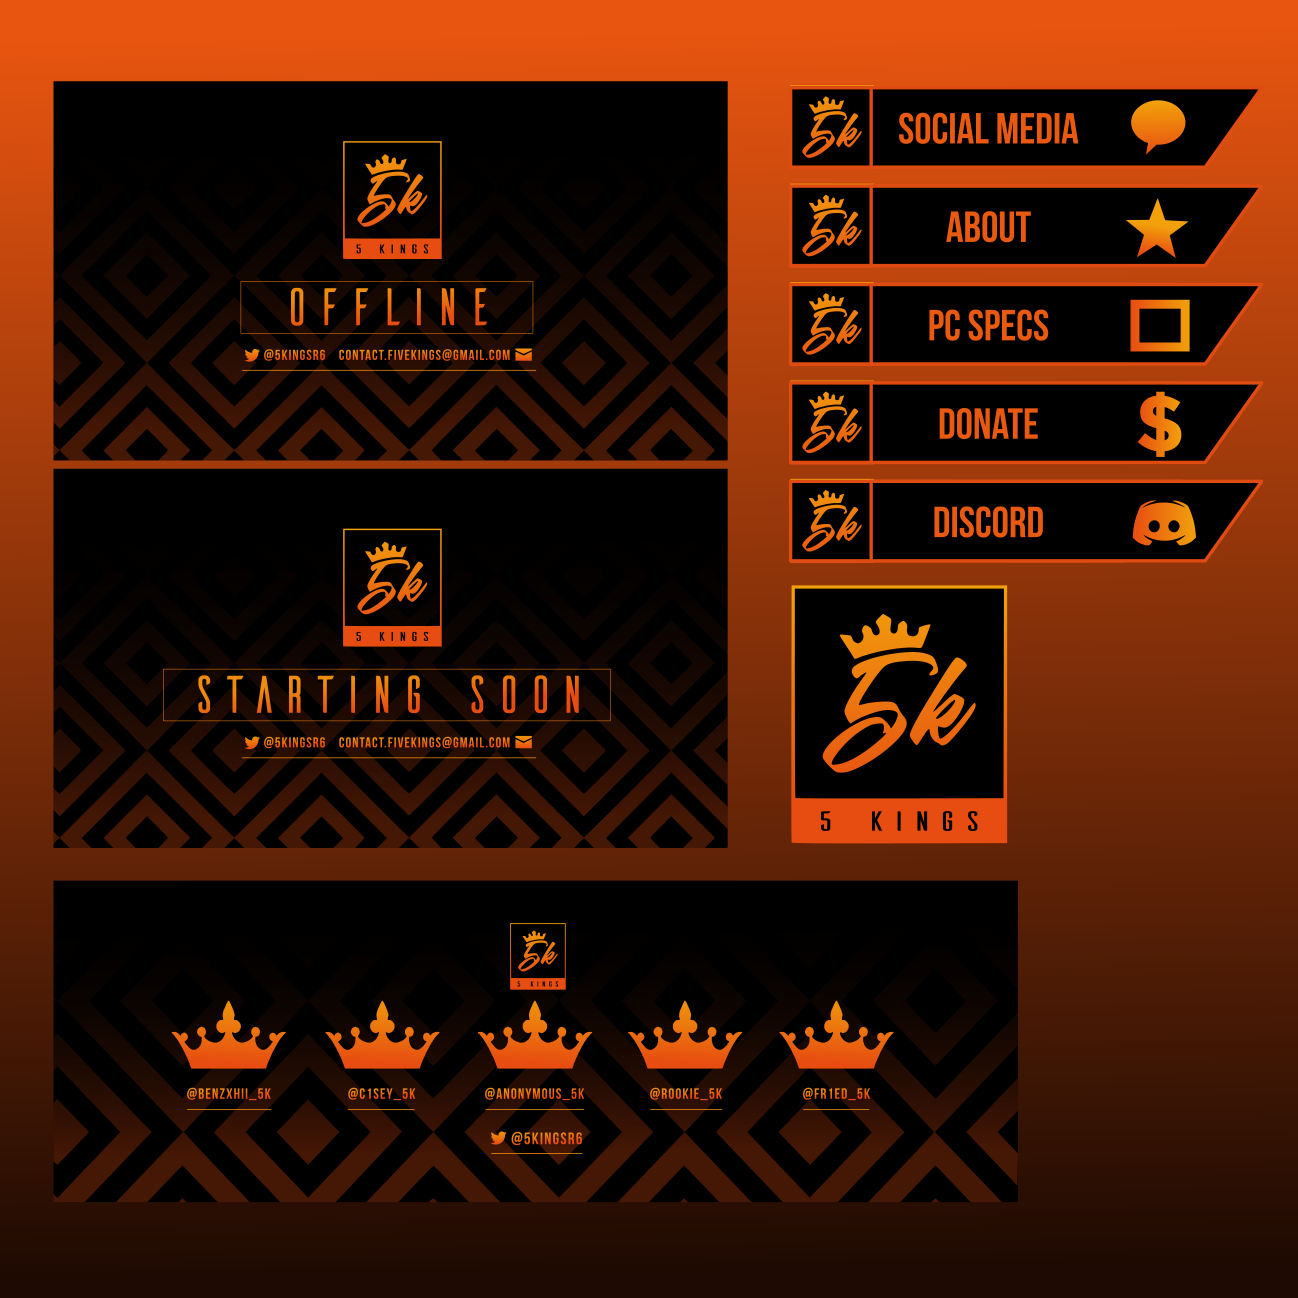 Twitch graphics for 5kings. Designed by Johnery